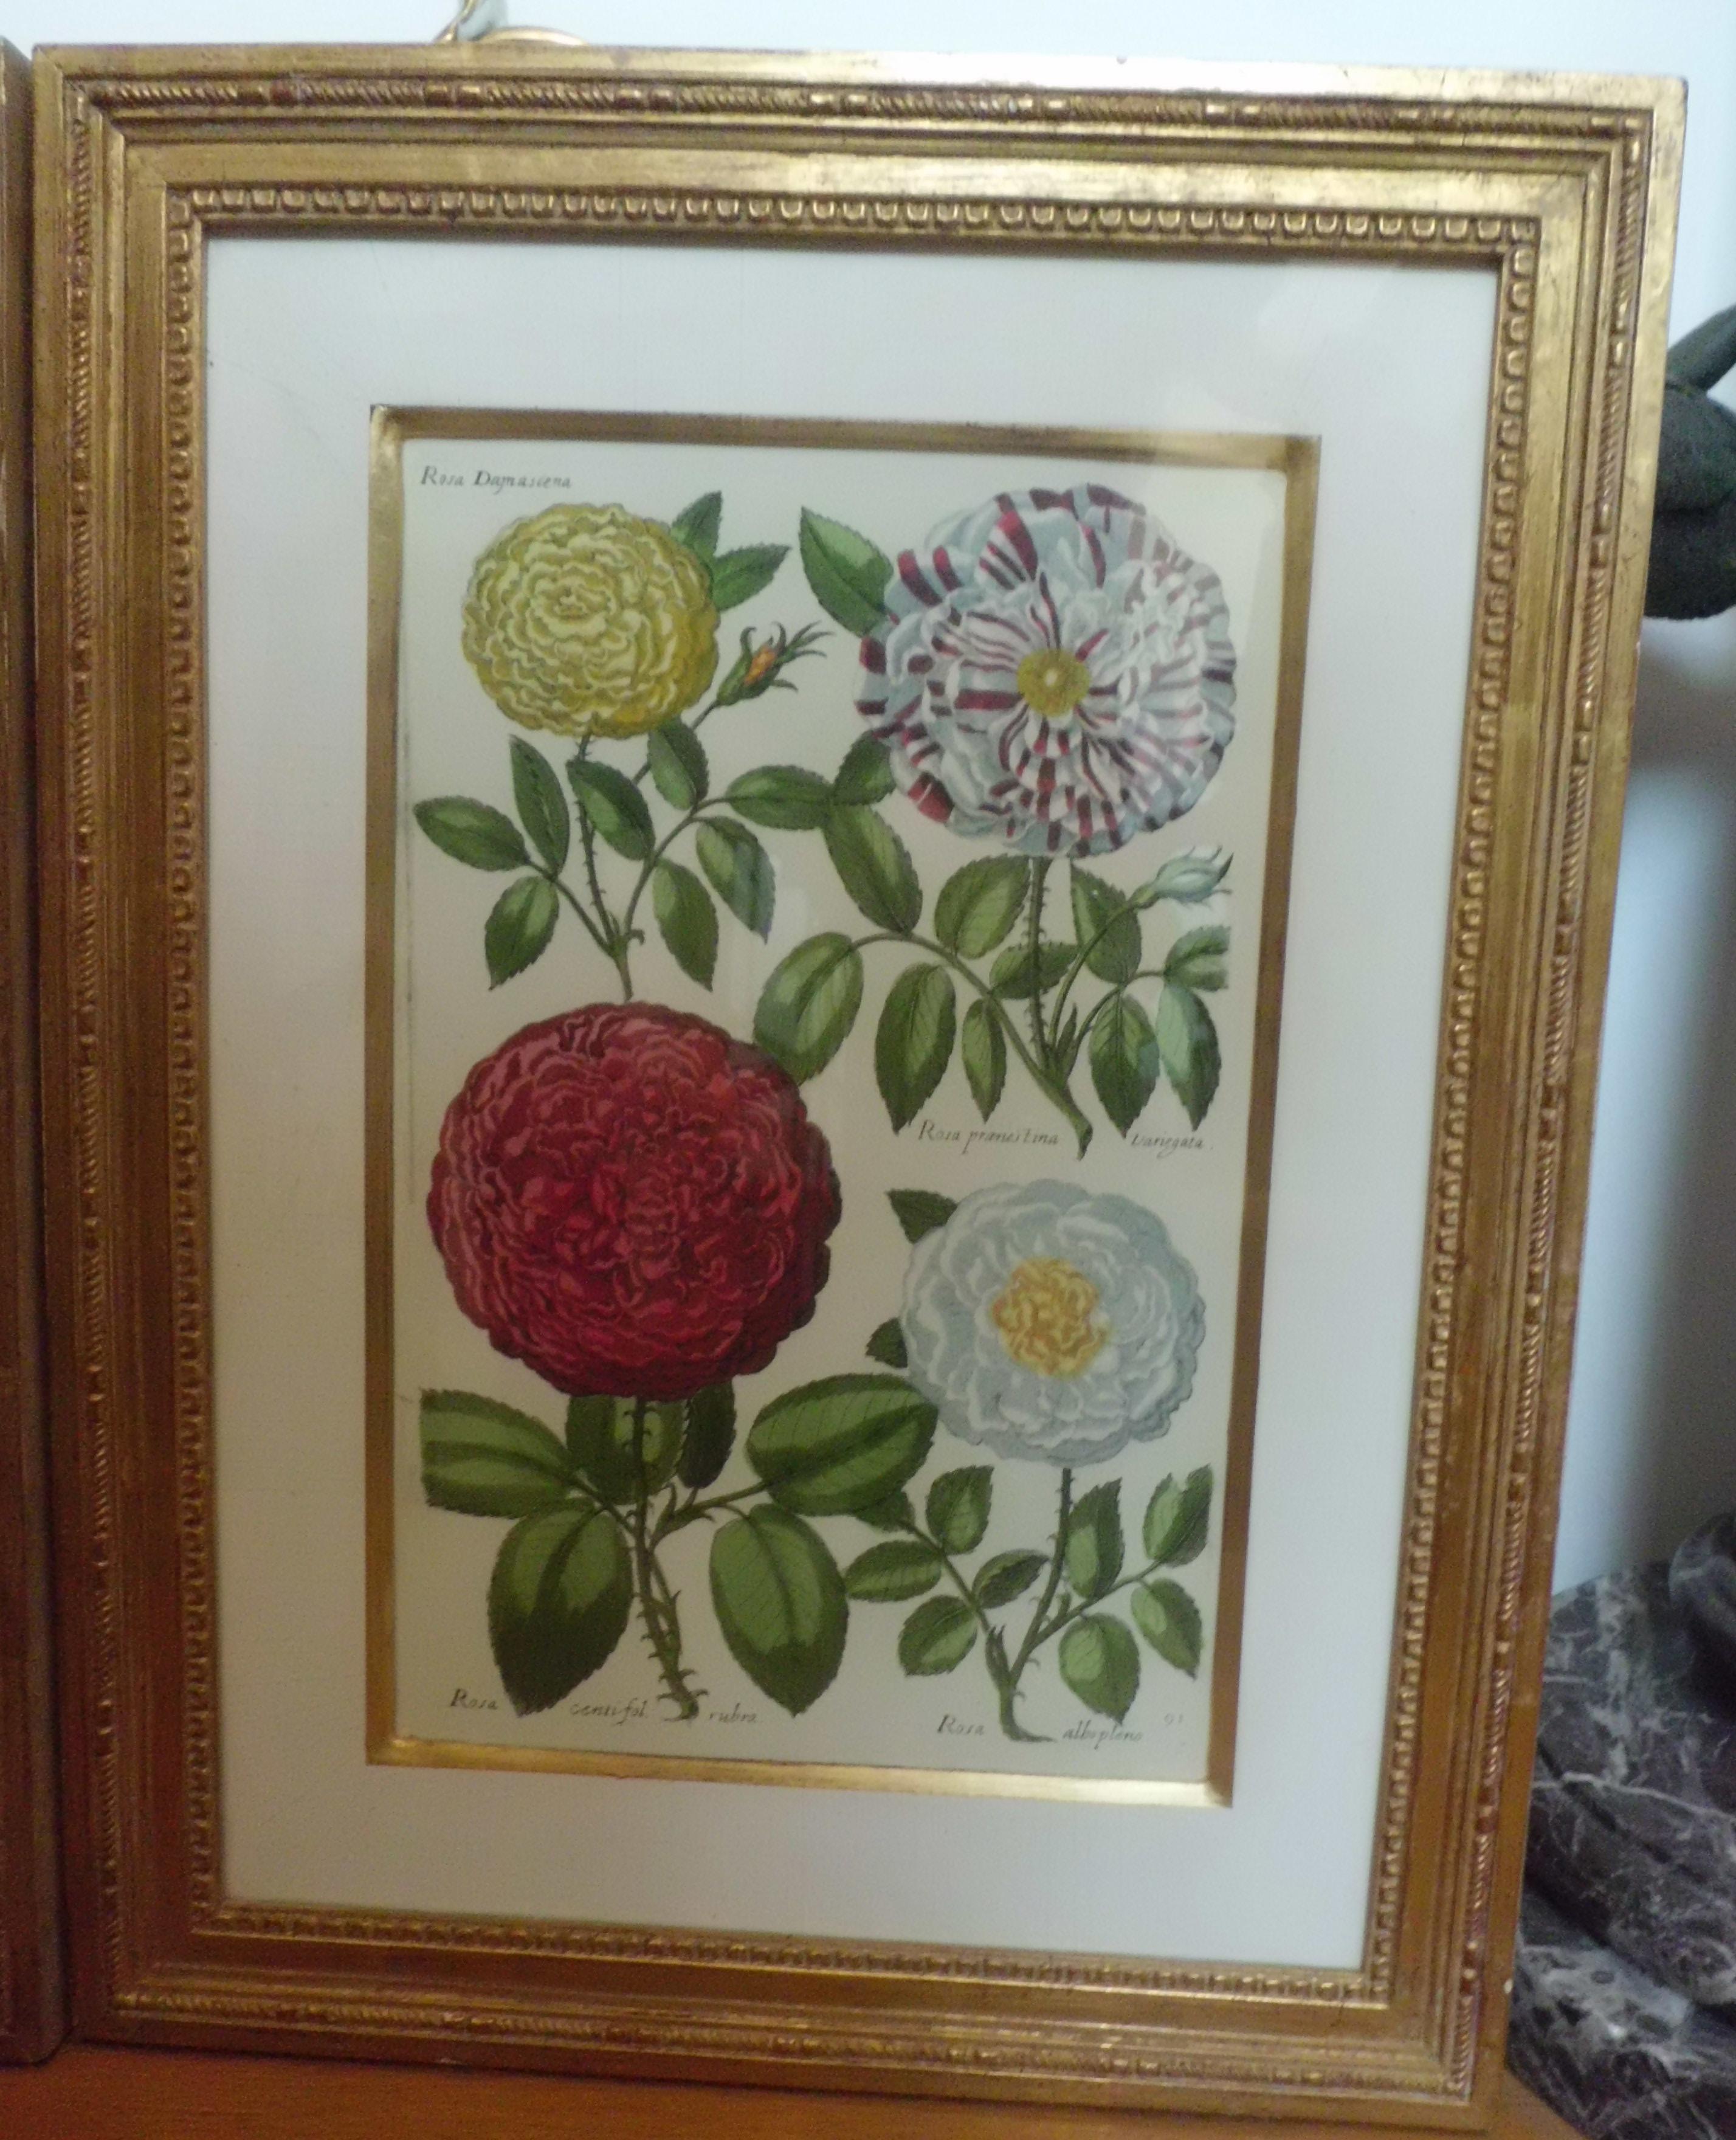 A pair of elegant botanical prints, roses and iris, from England based decorating company Trowbridge, 1990.
Hand carved giltwood frames.
Dimensions: Height cm 52, width cm 39, depth cm 3.